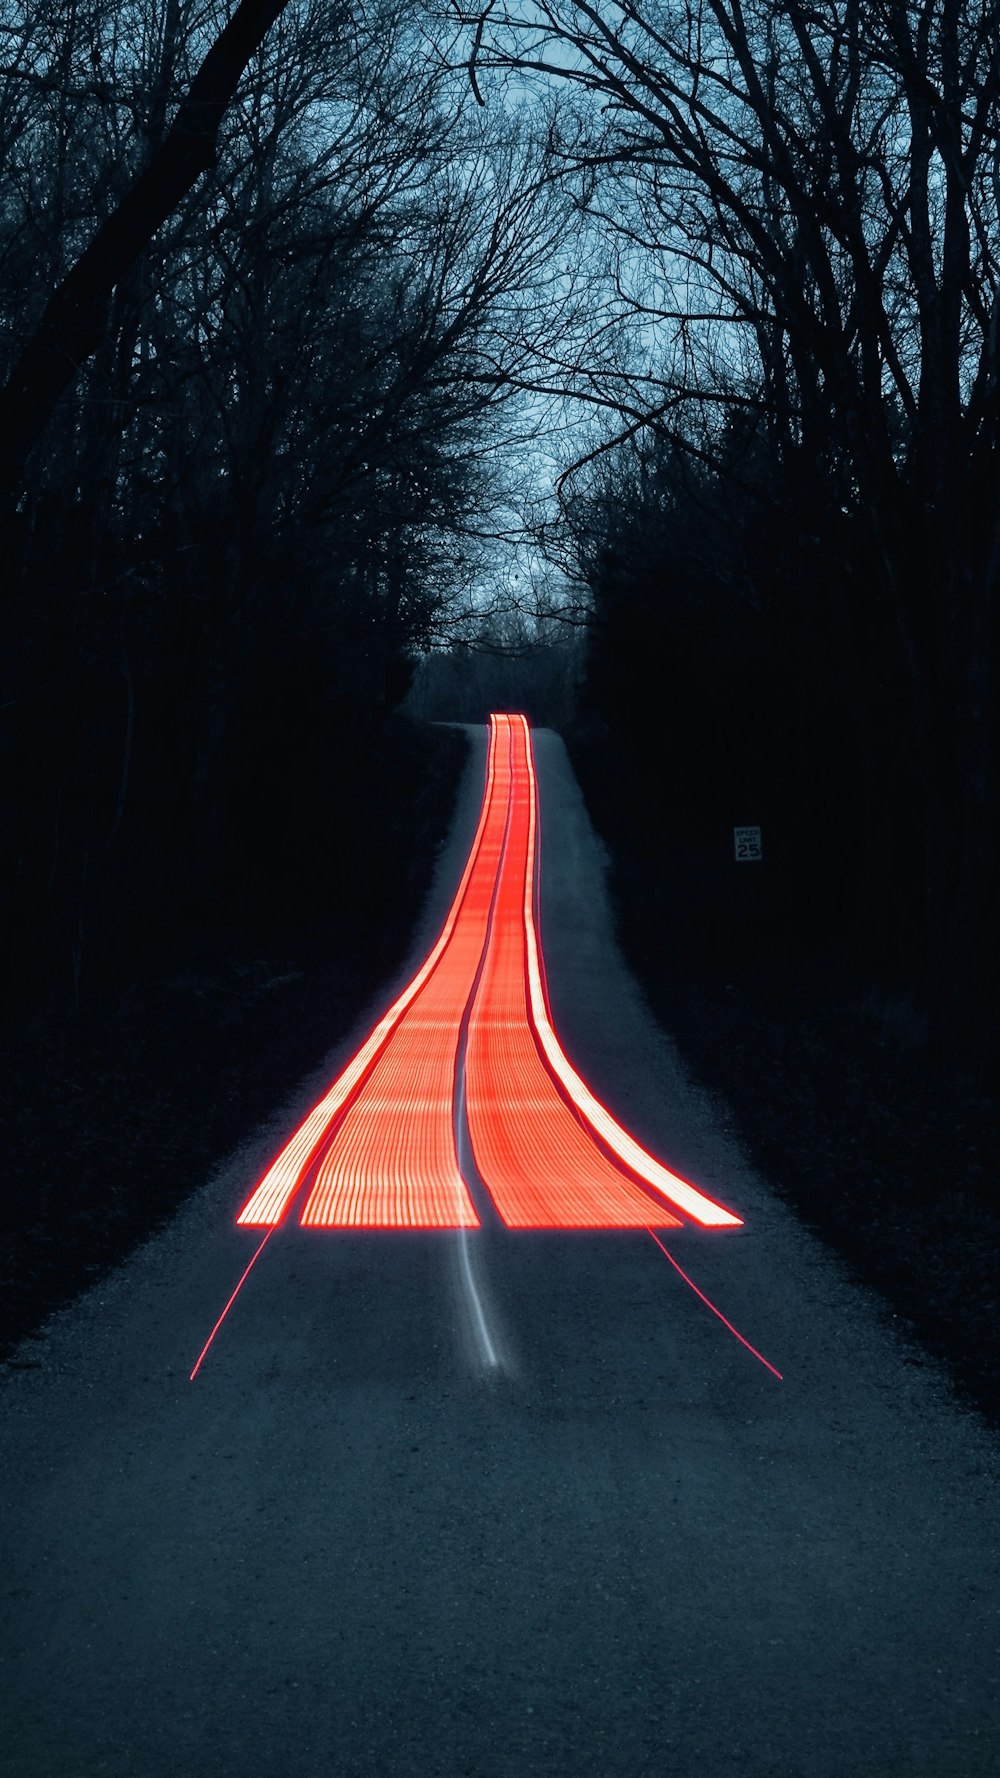 a long exposure photograph of a road at night